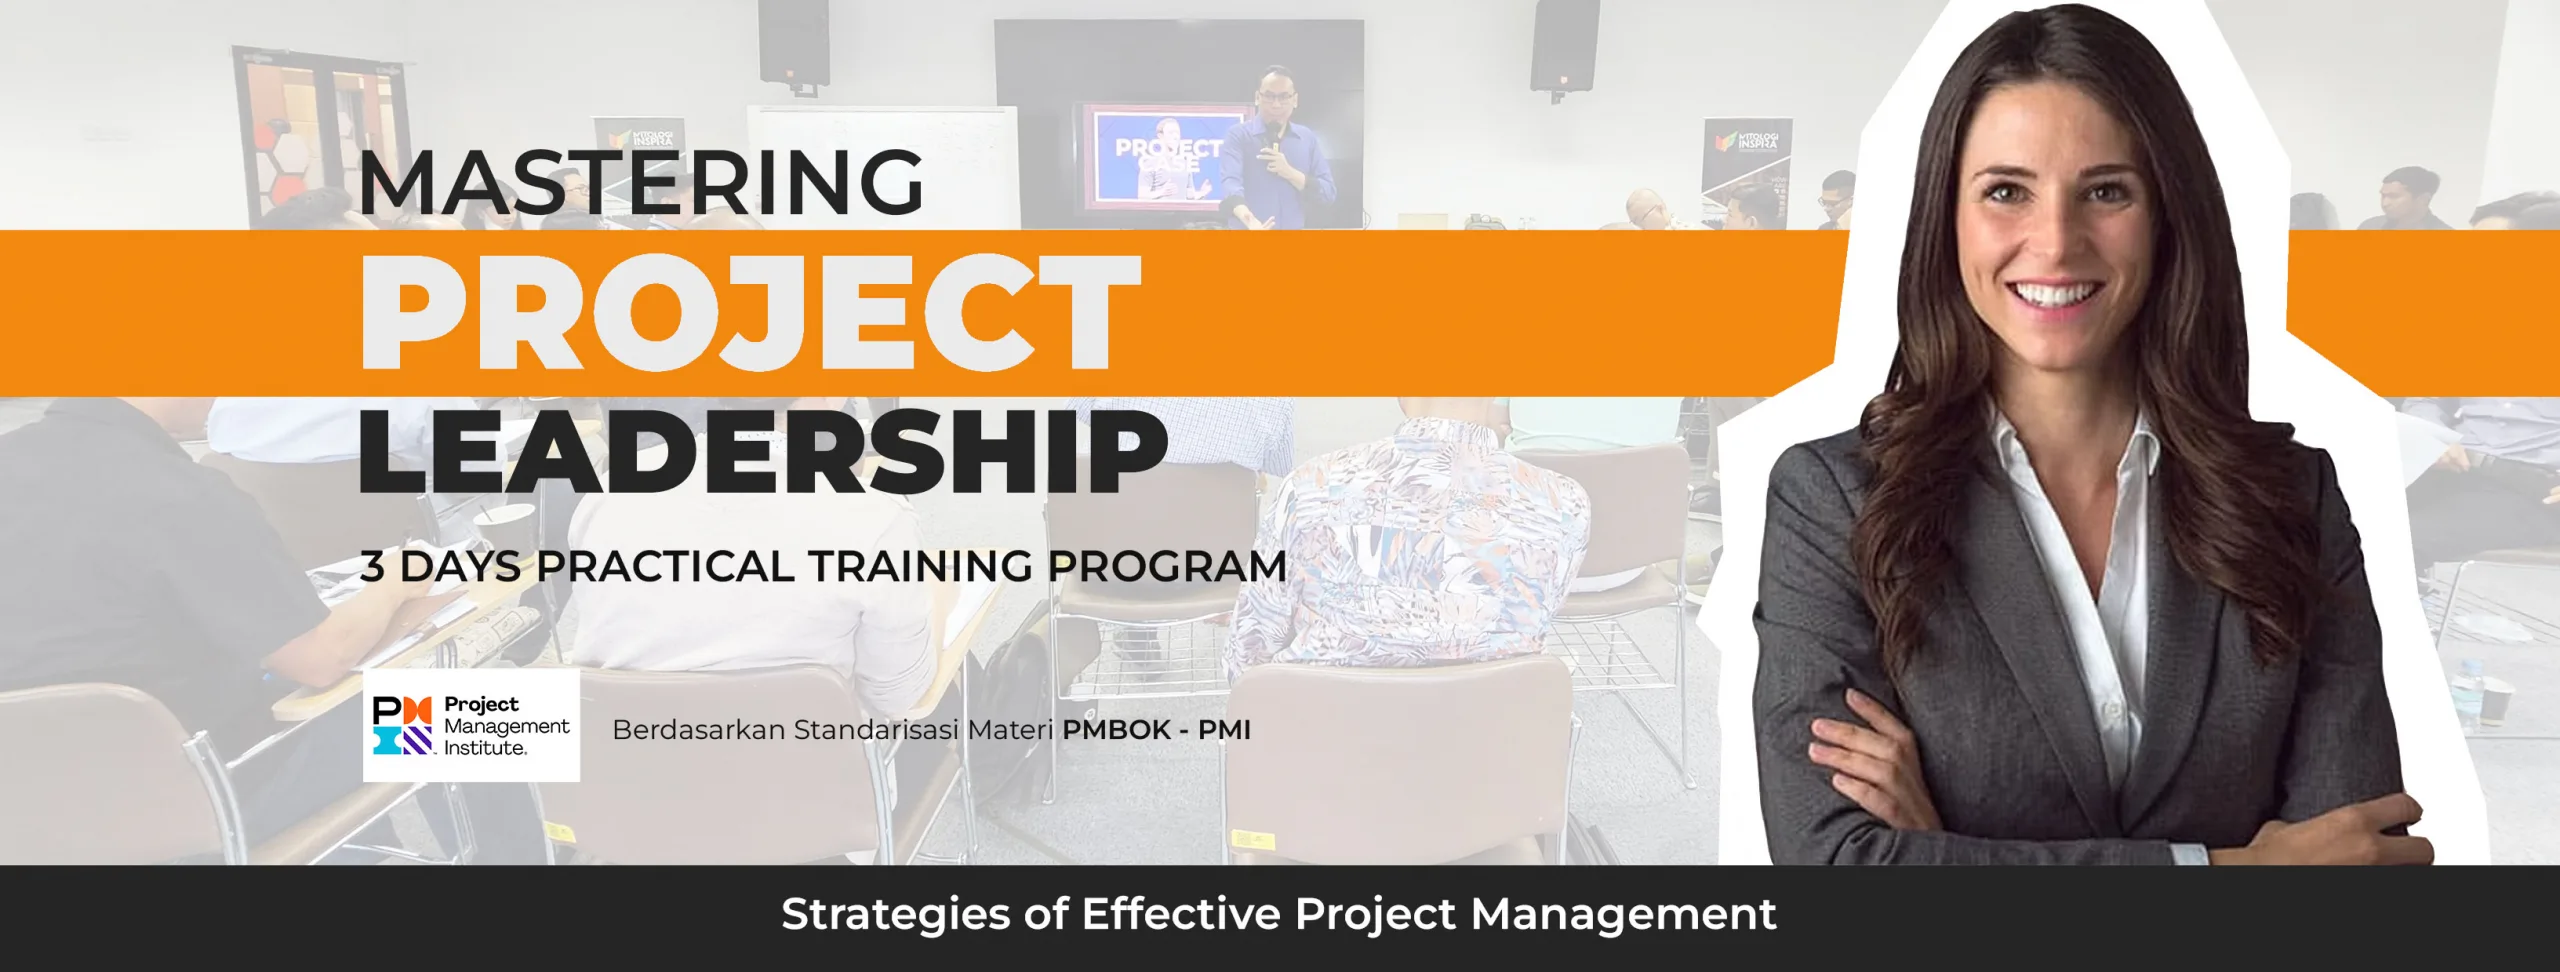 Training Project Management and Project Leadership, Strategy Project Management Indonesia, Pelatihan Strategi Bisnis, Leadership, dan Project Management Karyawan Indonesia